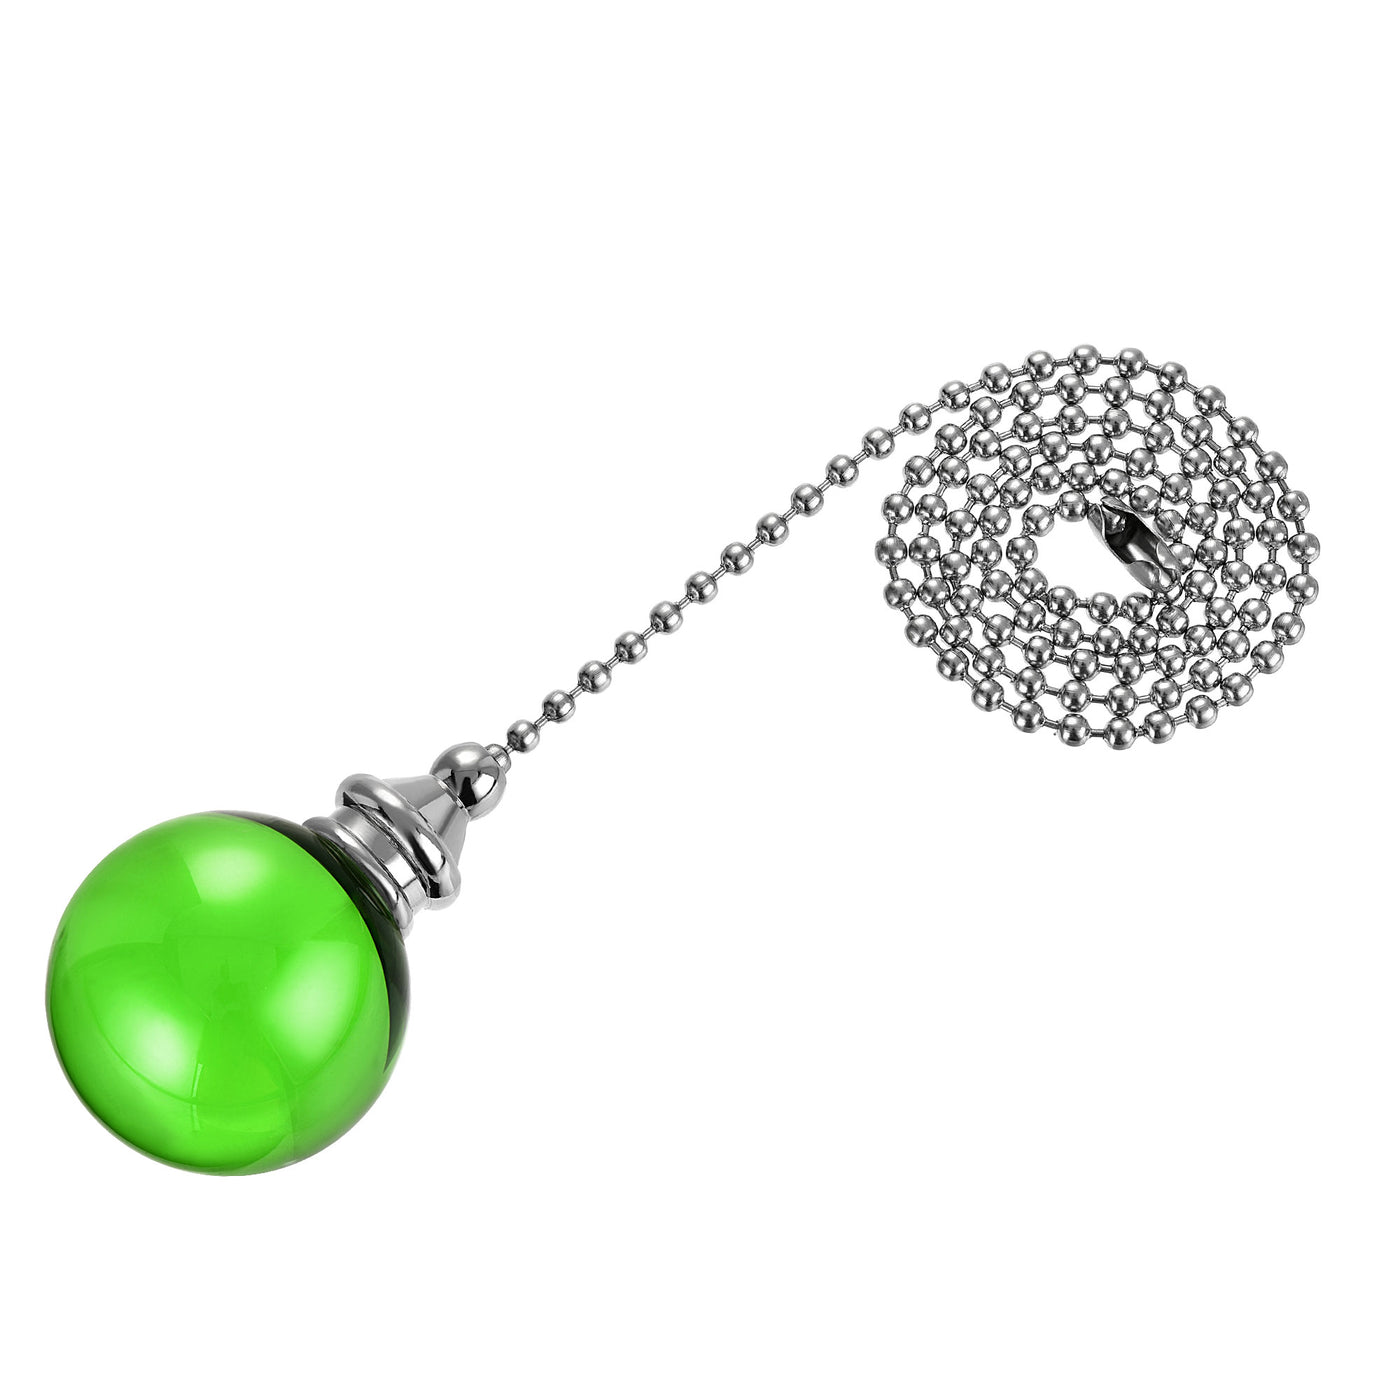 uxcell Uxcell Ceiling Fan Pull Chain, 20 Inch Fan Pull Chain Ornament Extension Lighting Accessories, 30mm Crystal Ball Pendant, Green